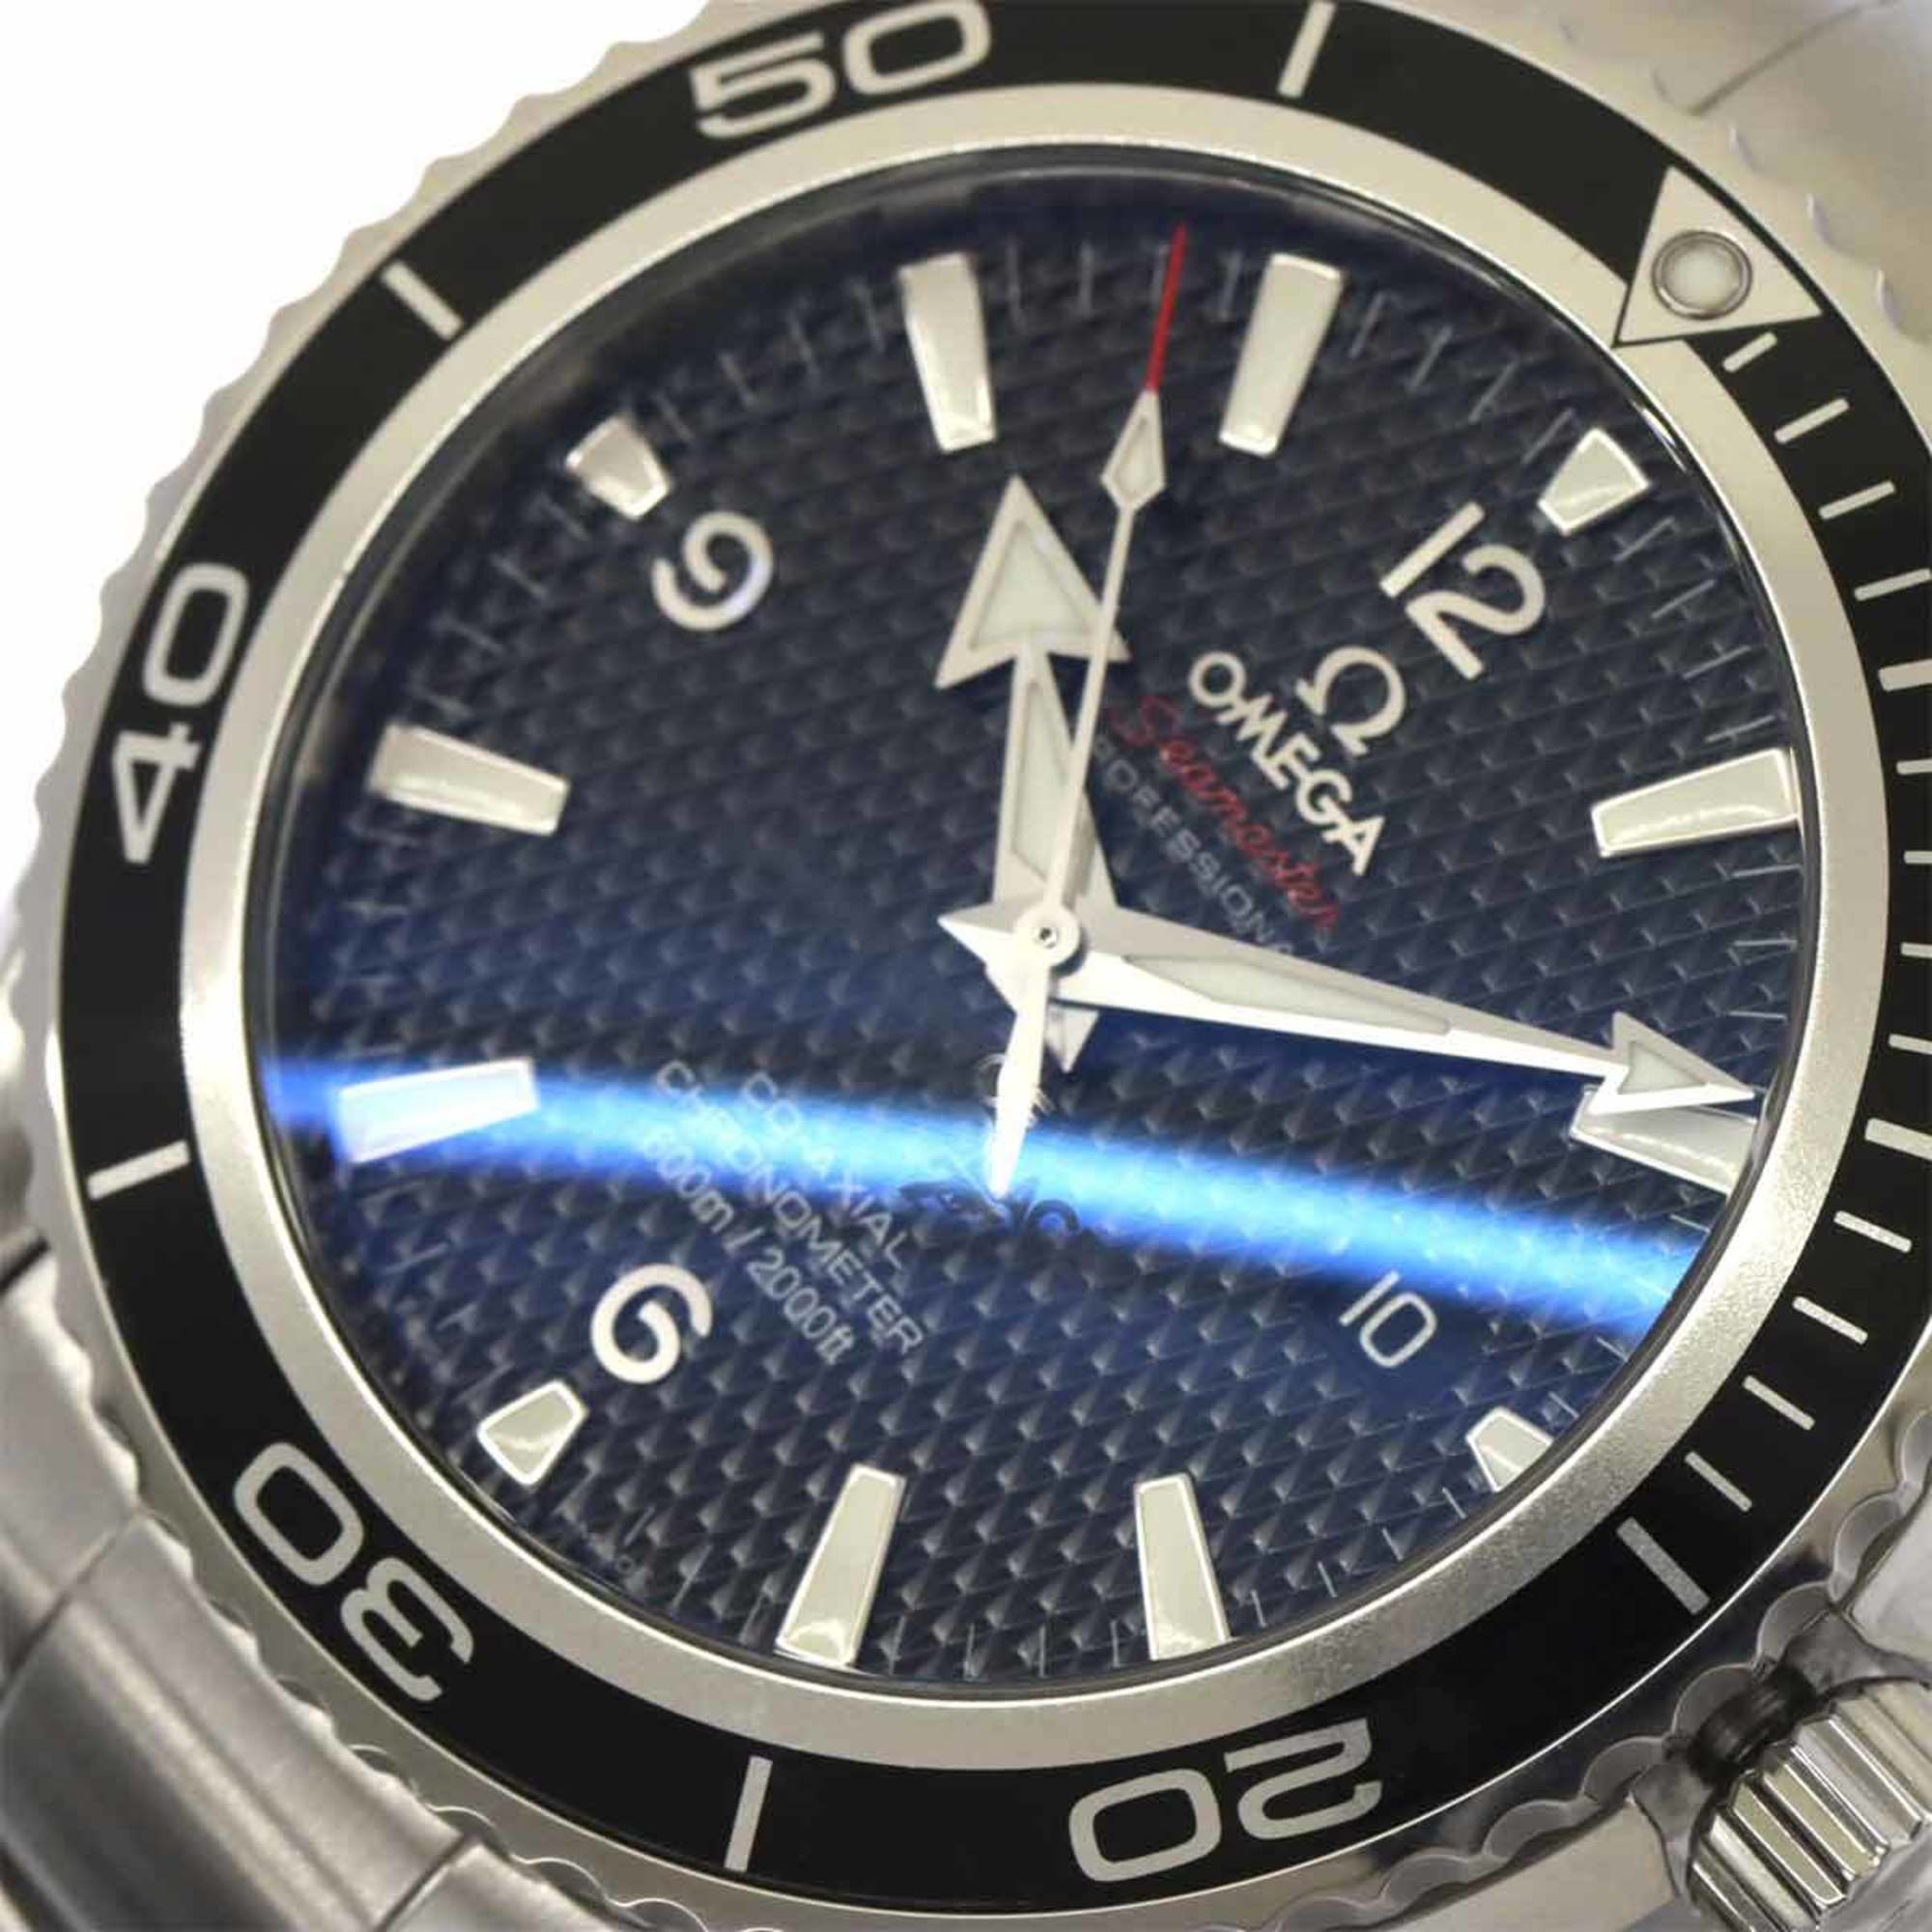 OMEGA Seamaster Planet Ocean 007 Limited to 5007 pieces worldwide 222 30 46 20 01 001 Men's watch Date Black dial Automatic